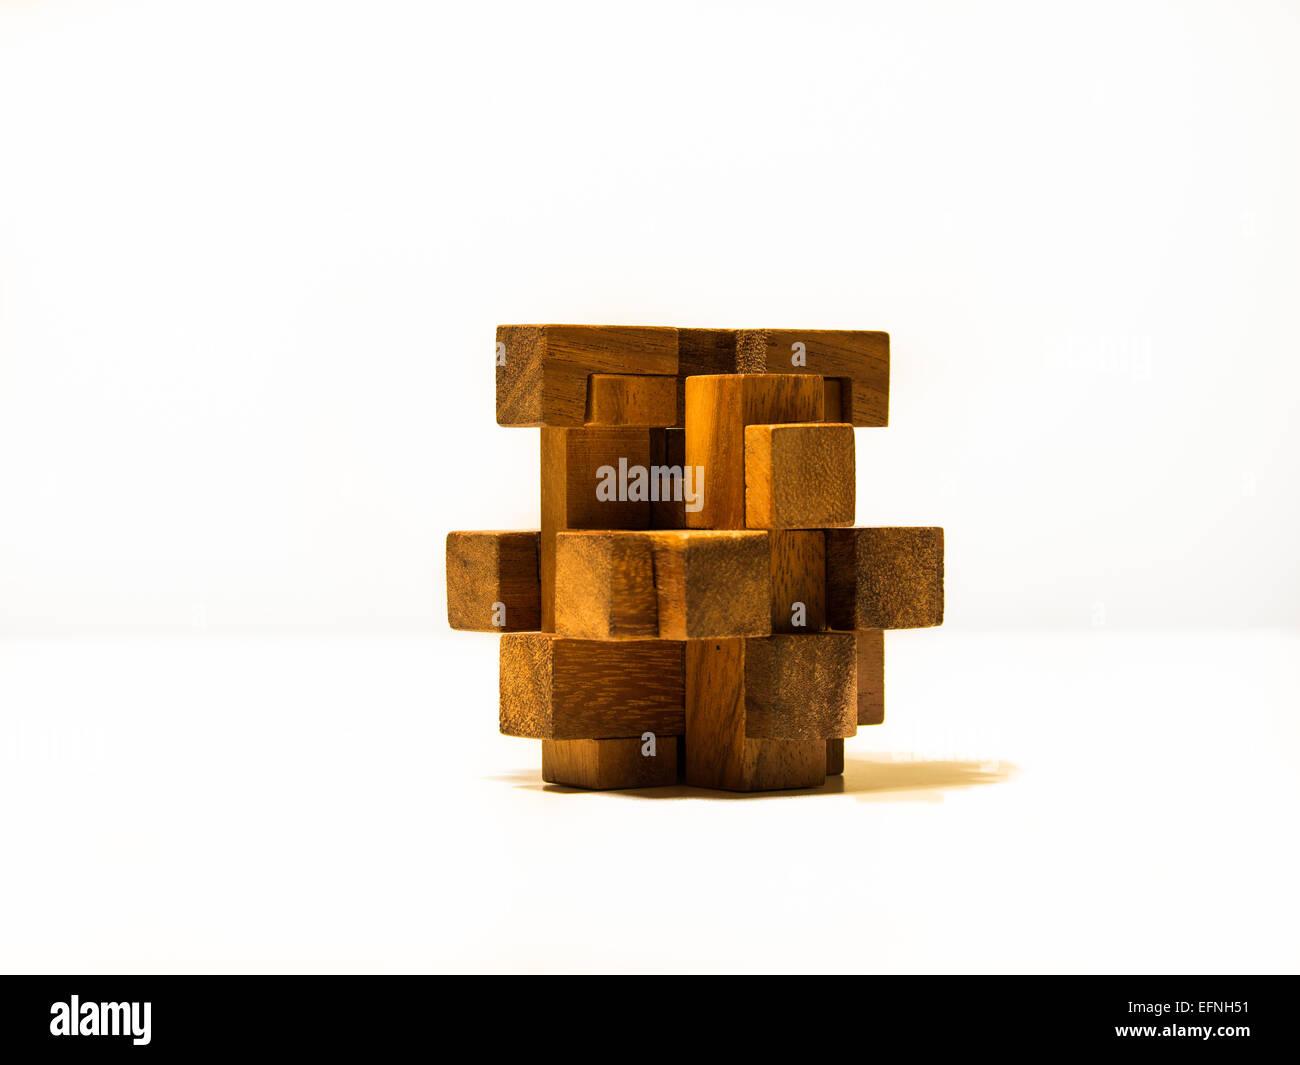 Image of a 3D wooden puzzle over a white background Stock Photo